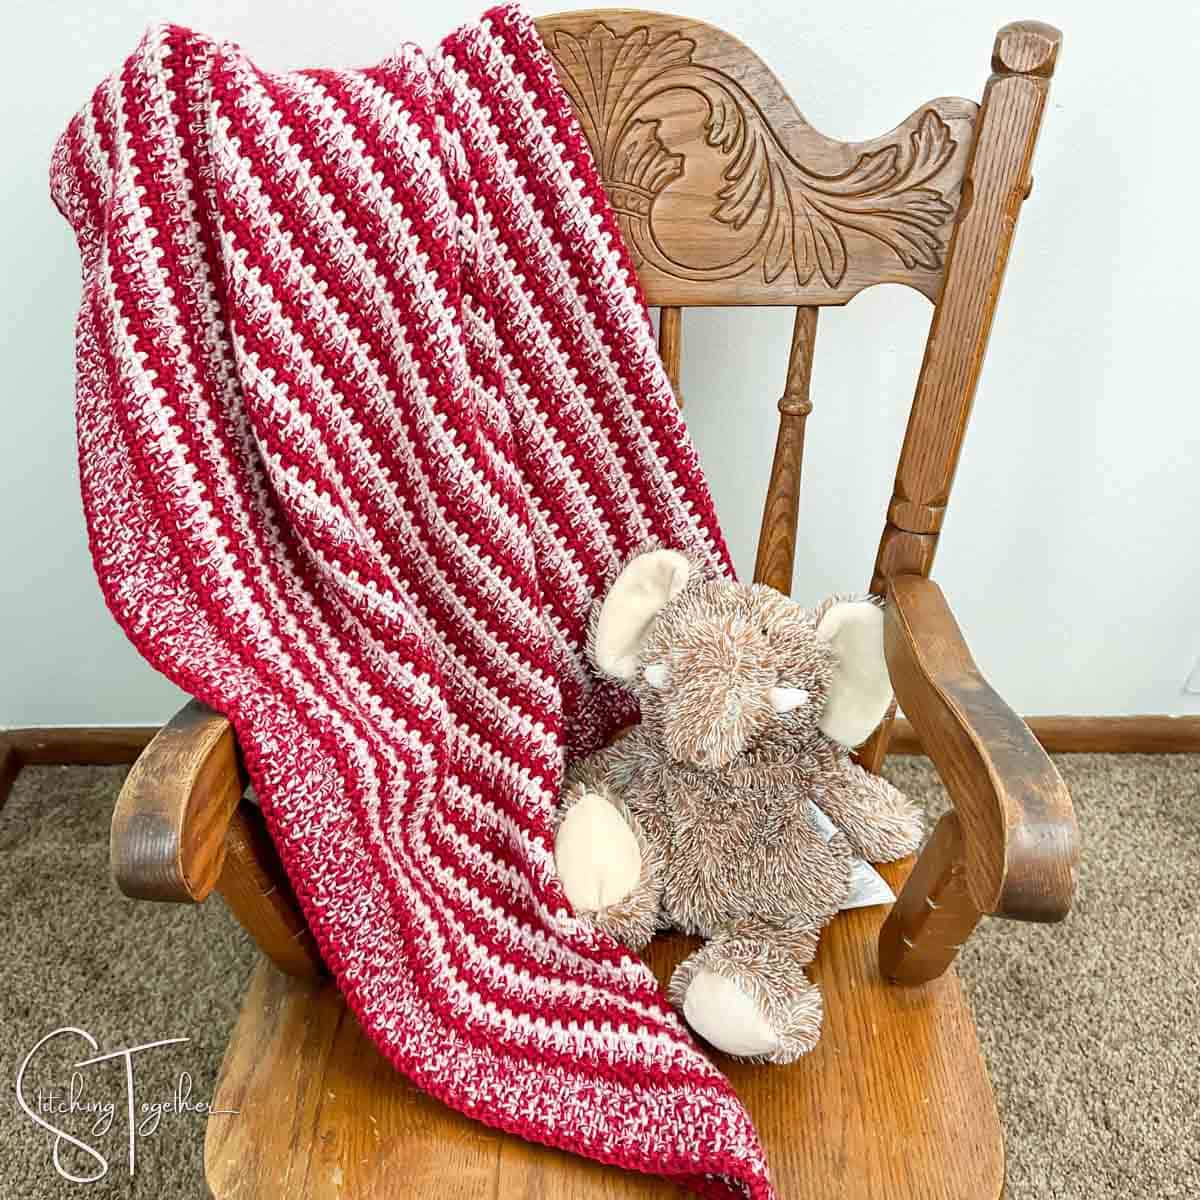 striped crochet baby blanket draped on a small chair with an elephant stuffed animal sitting on the chair